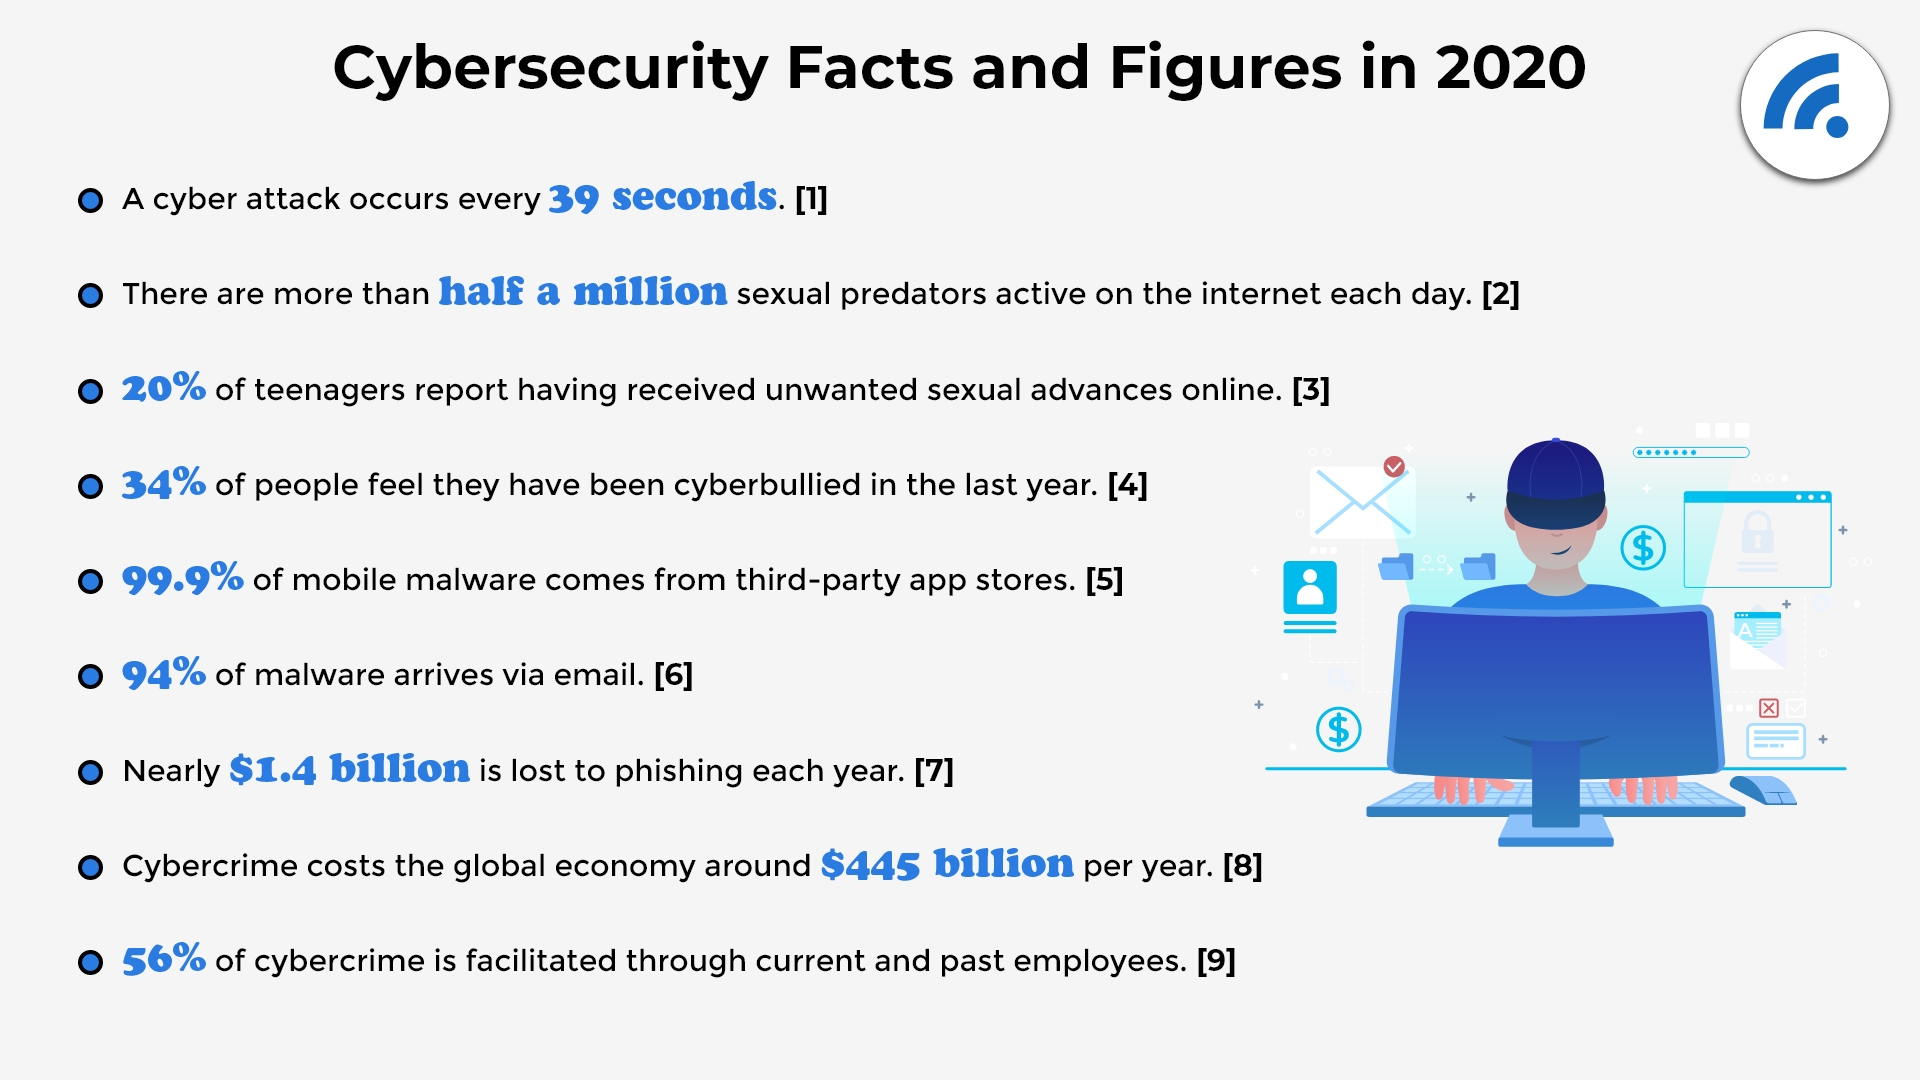 Cybersecurity Facts and Figures In 2020